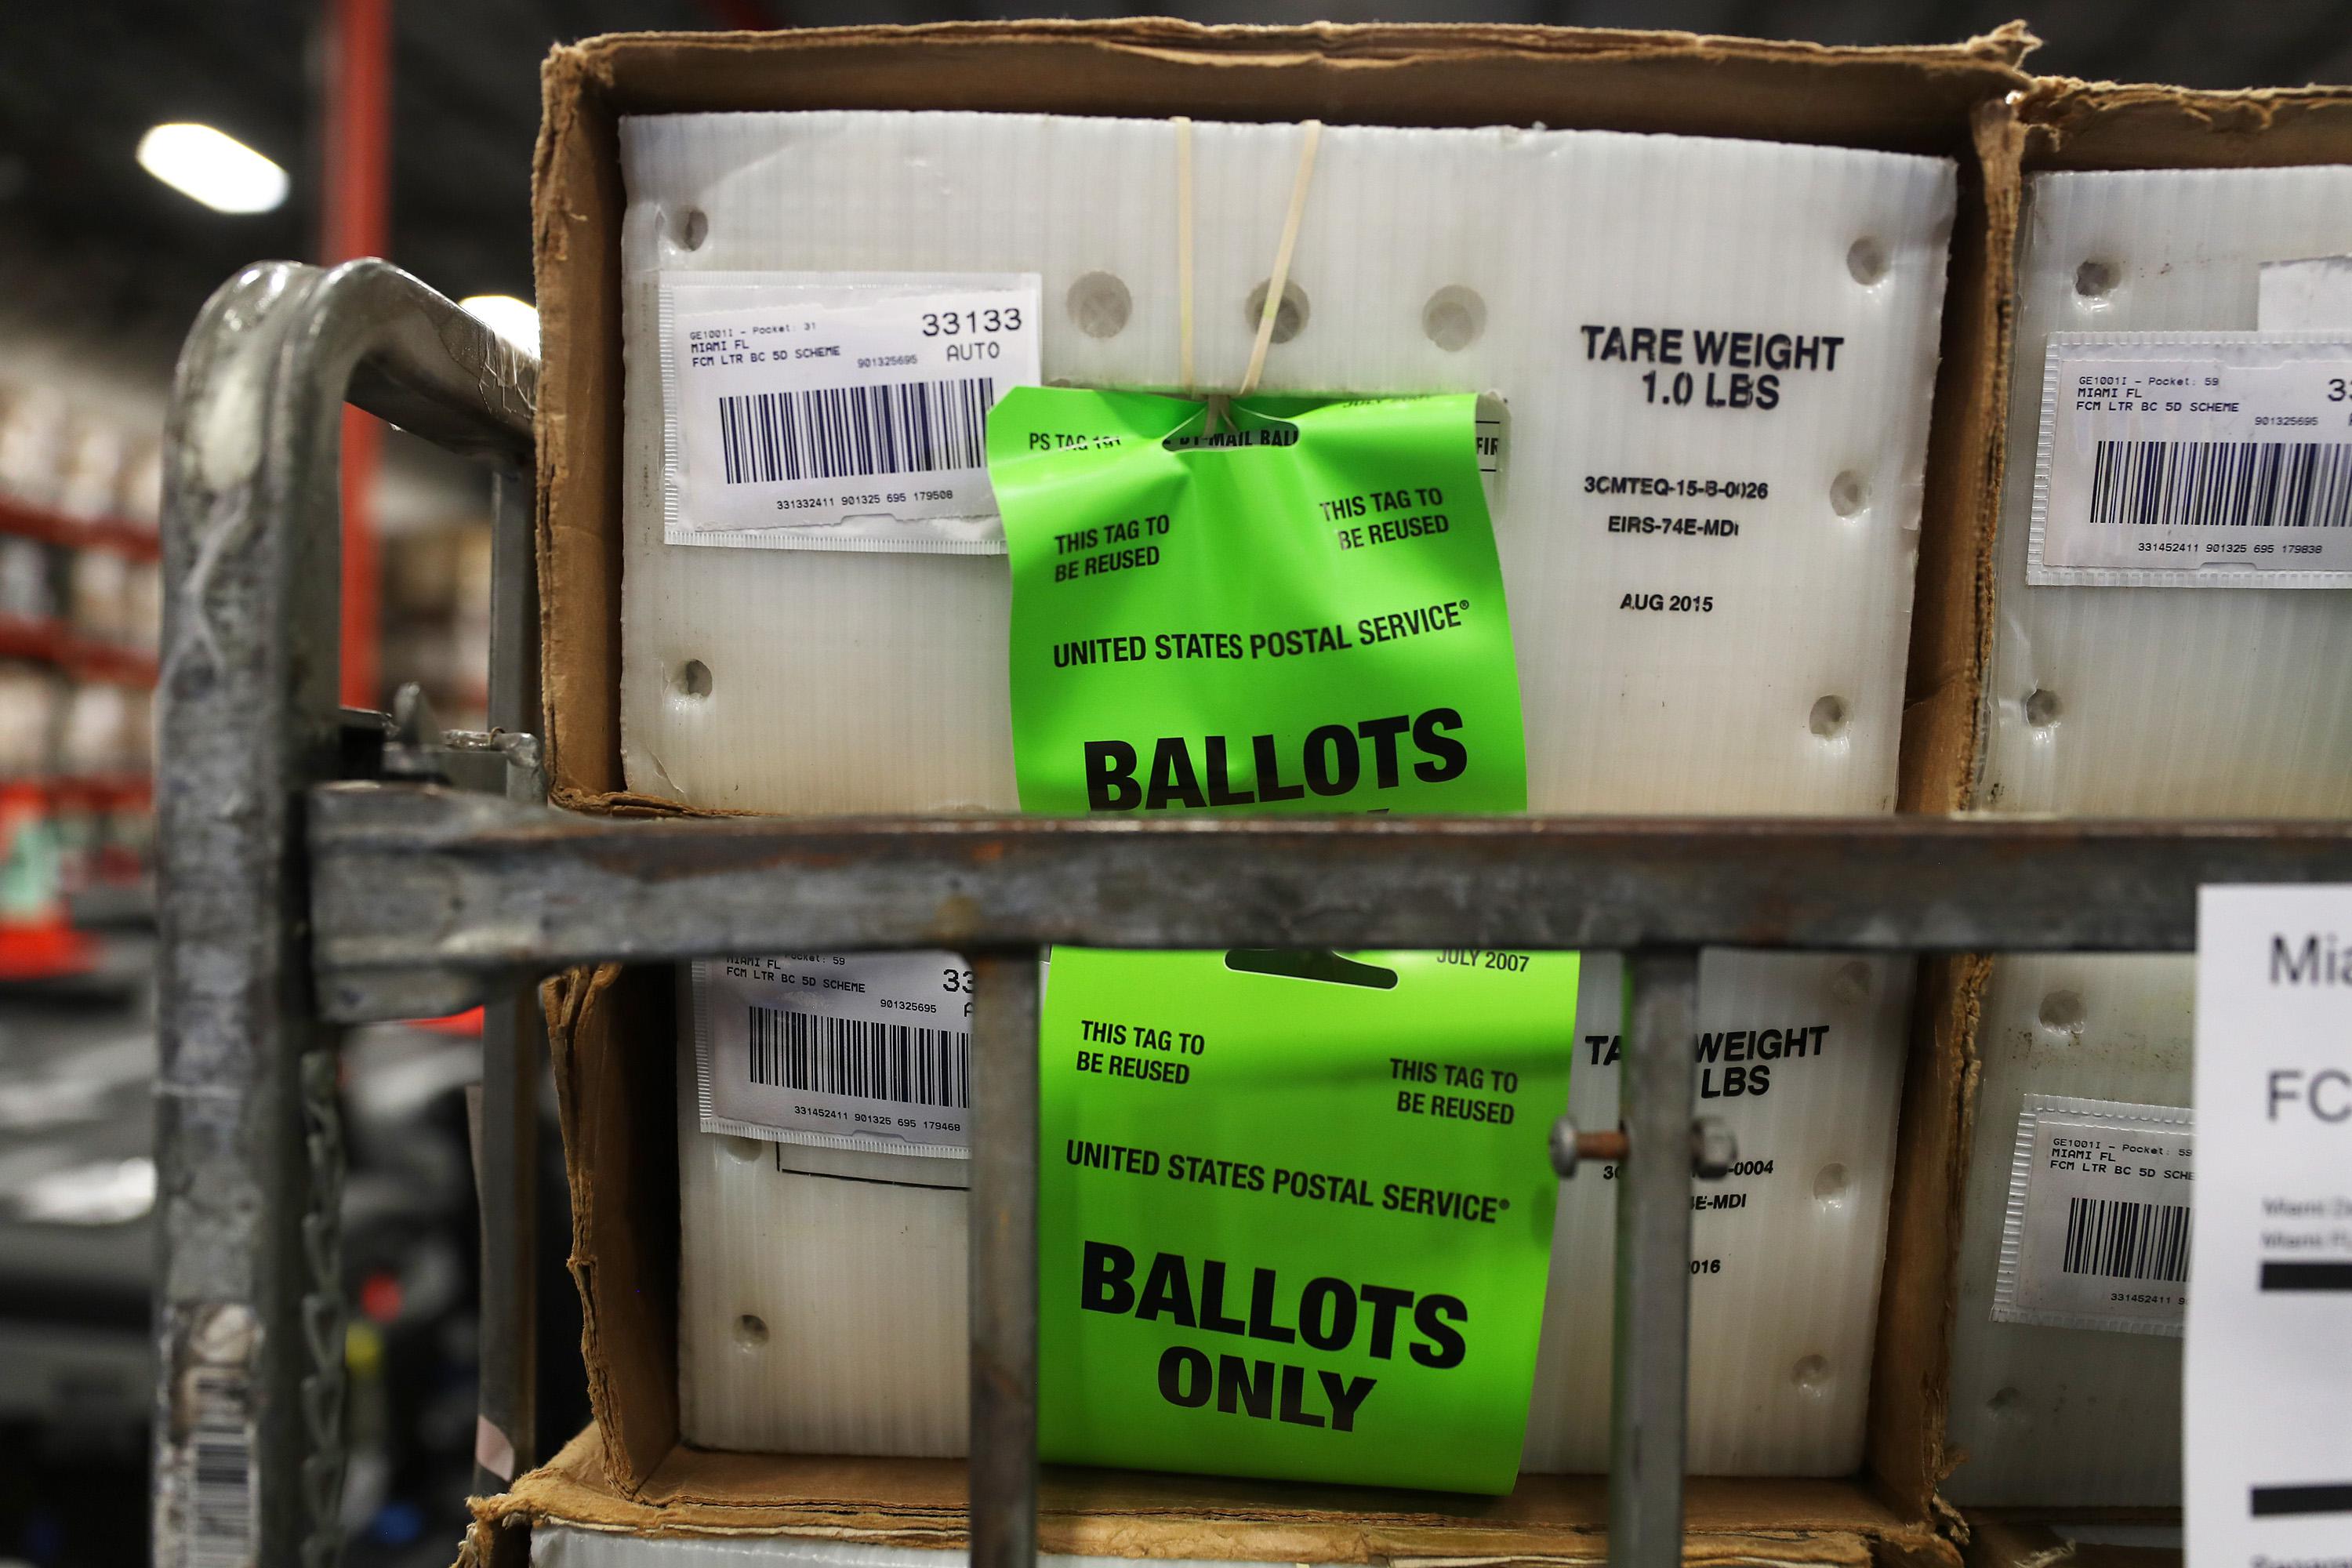 Boxes of ballots stacked on a cart before delivery